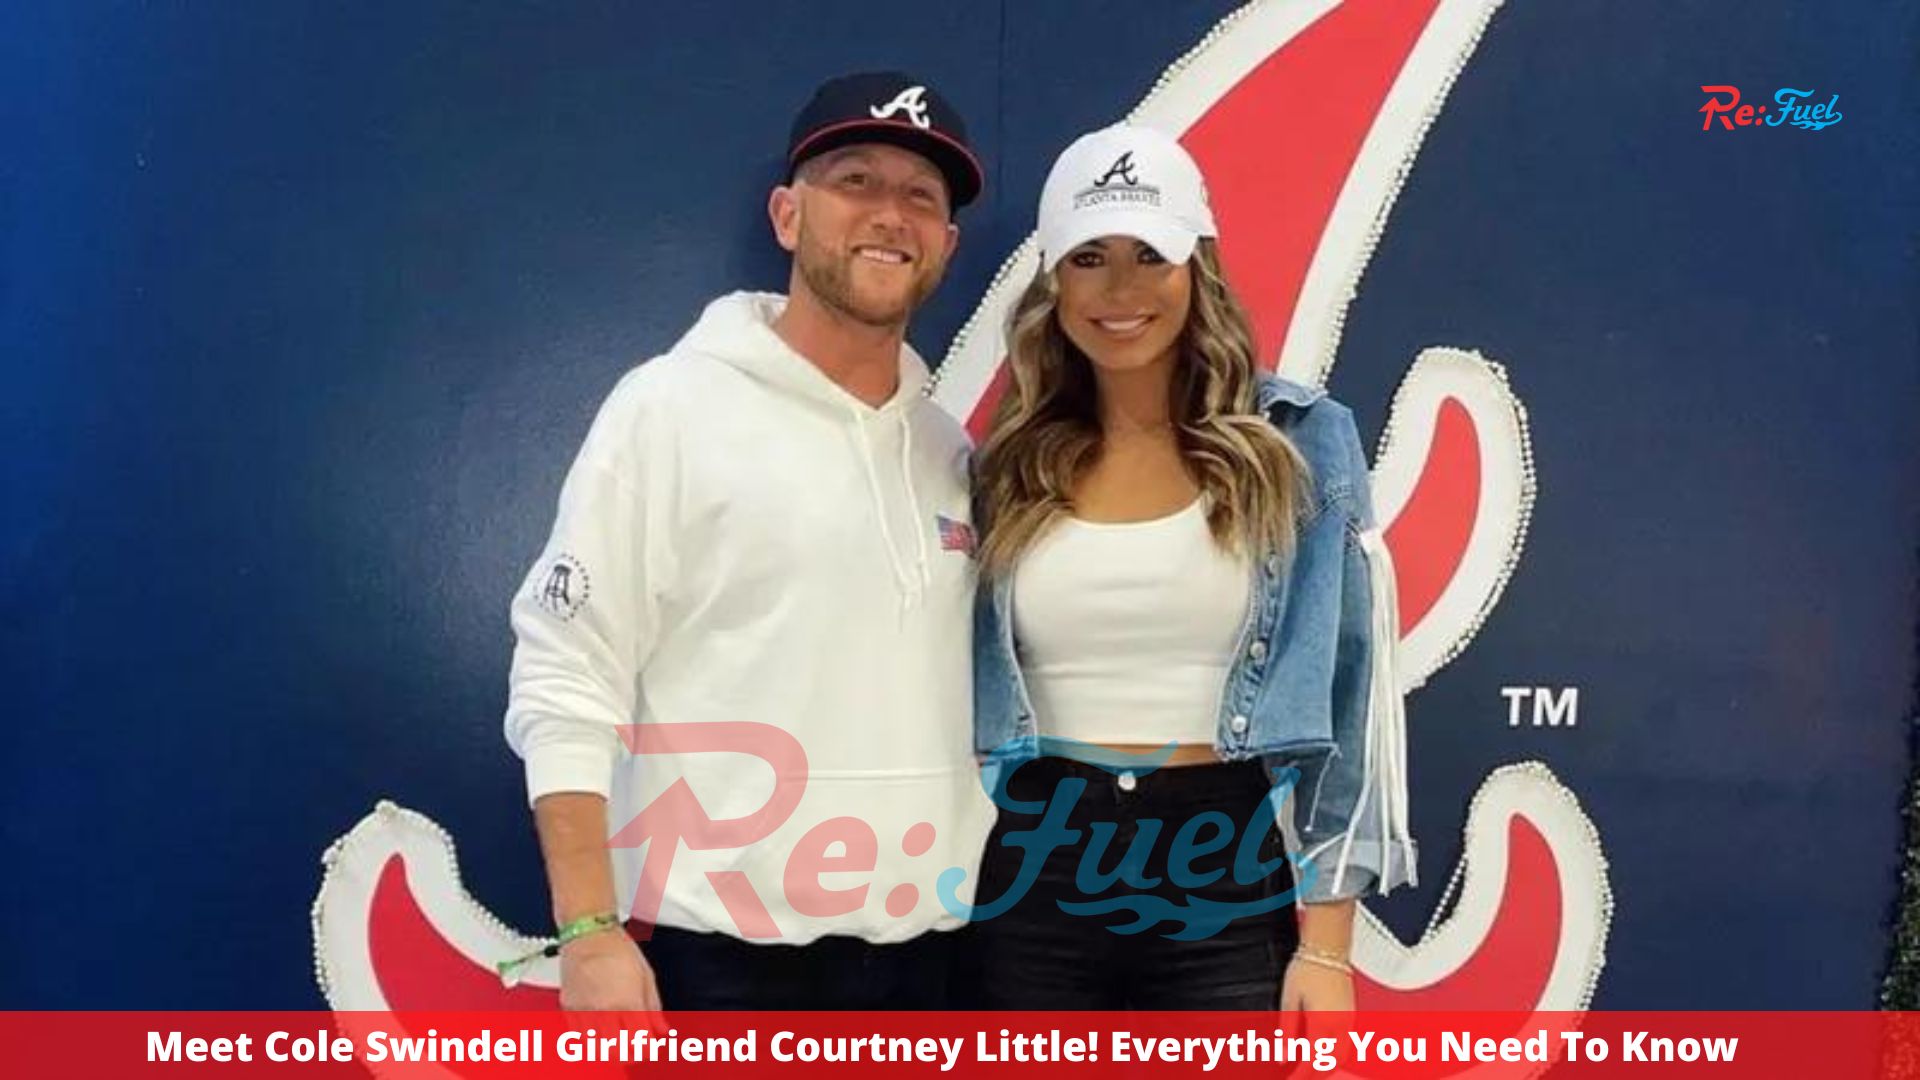 Meet Cole Swindell Girlfriend Courtney Little! Everything You Need To Know